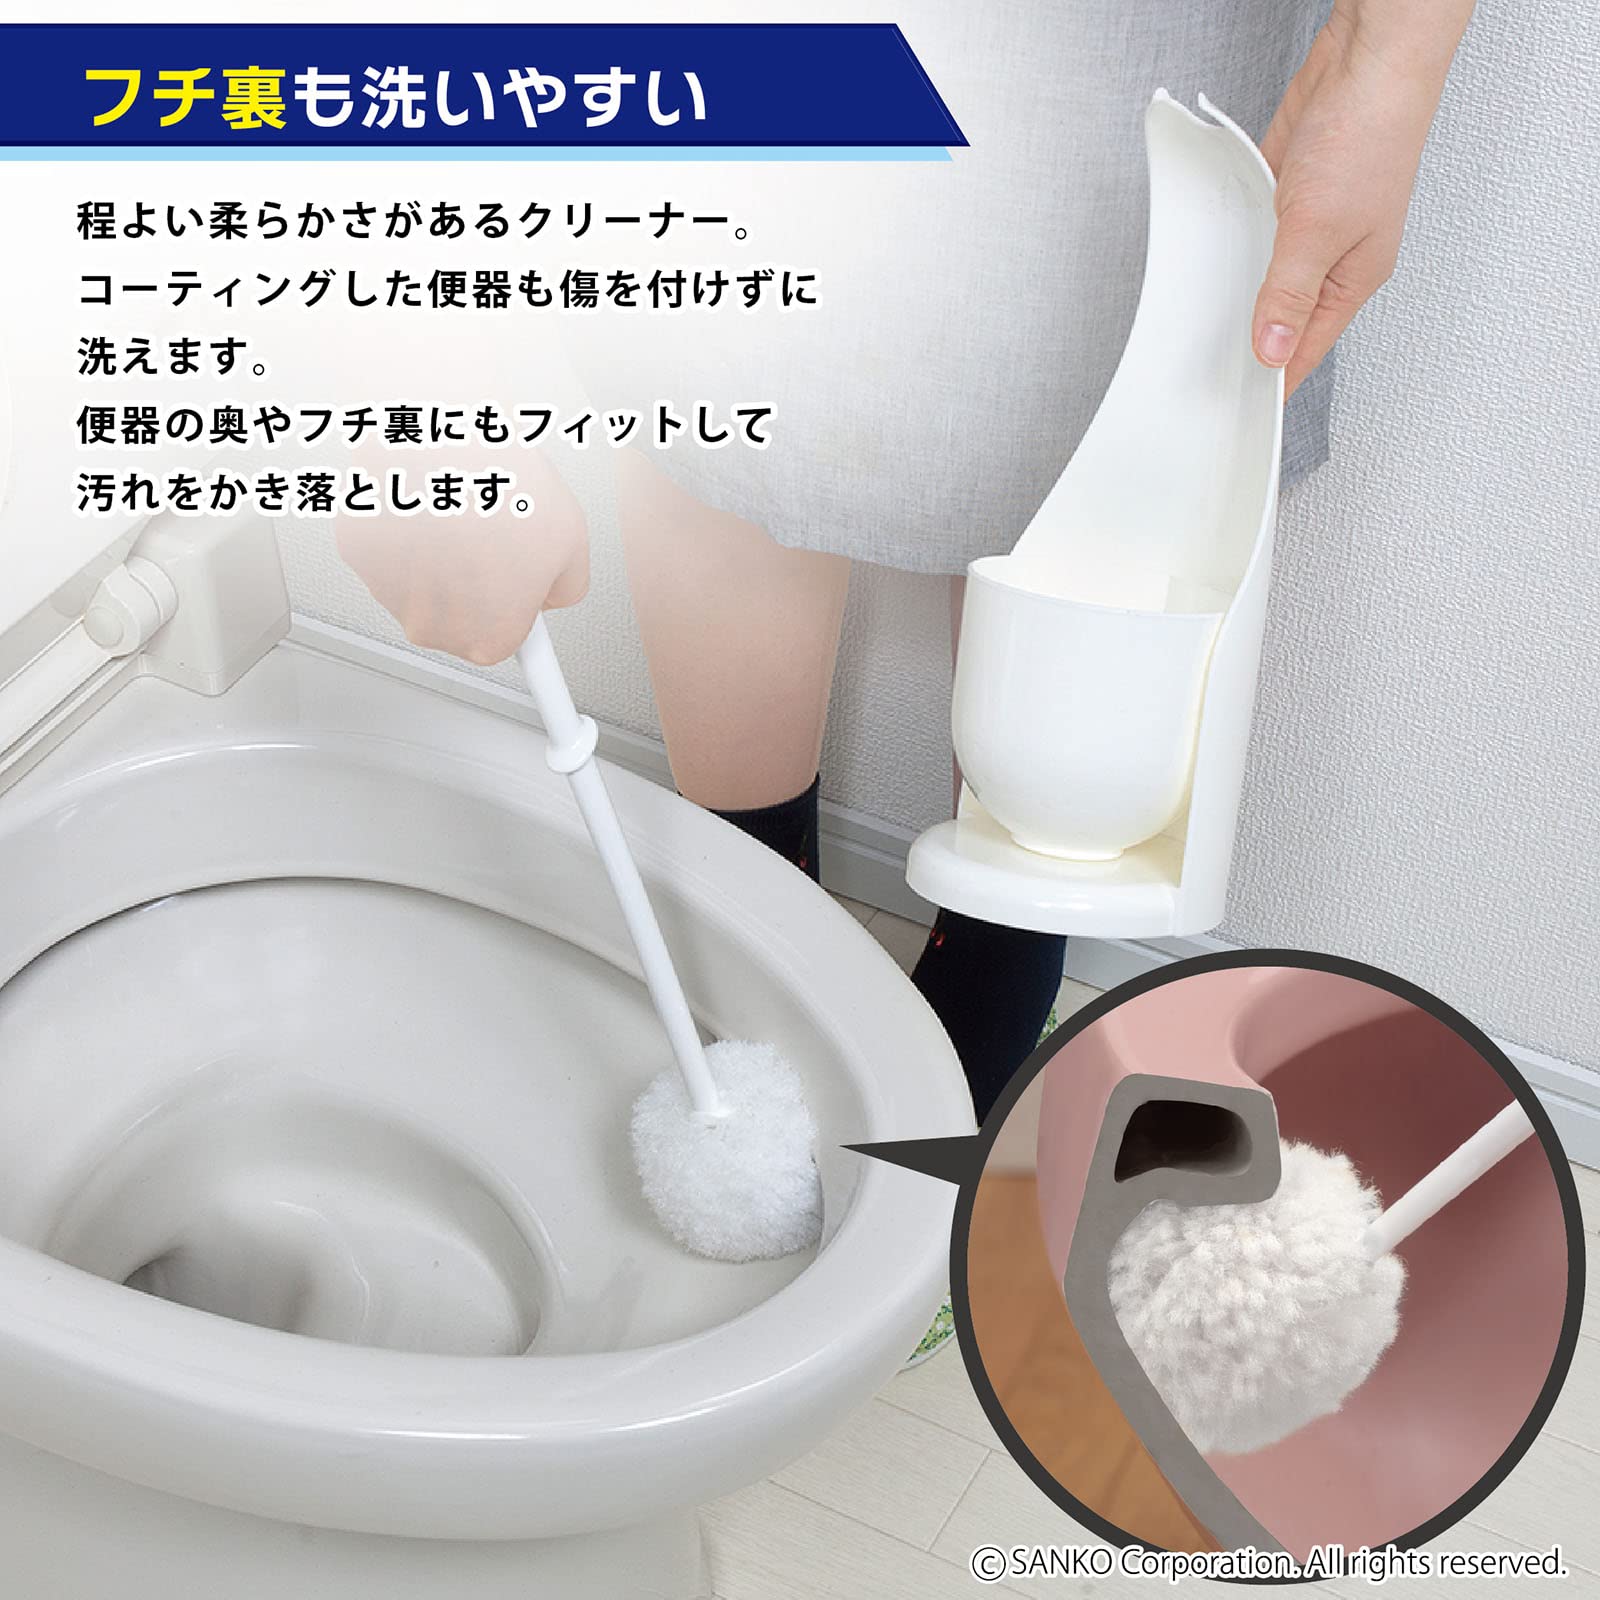 Sanko sun ko- soft toilet brush case attaching water only also dirt ..... special fiber scratch . attaching difficult regular white surprised fresh day book